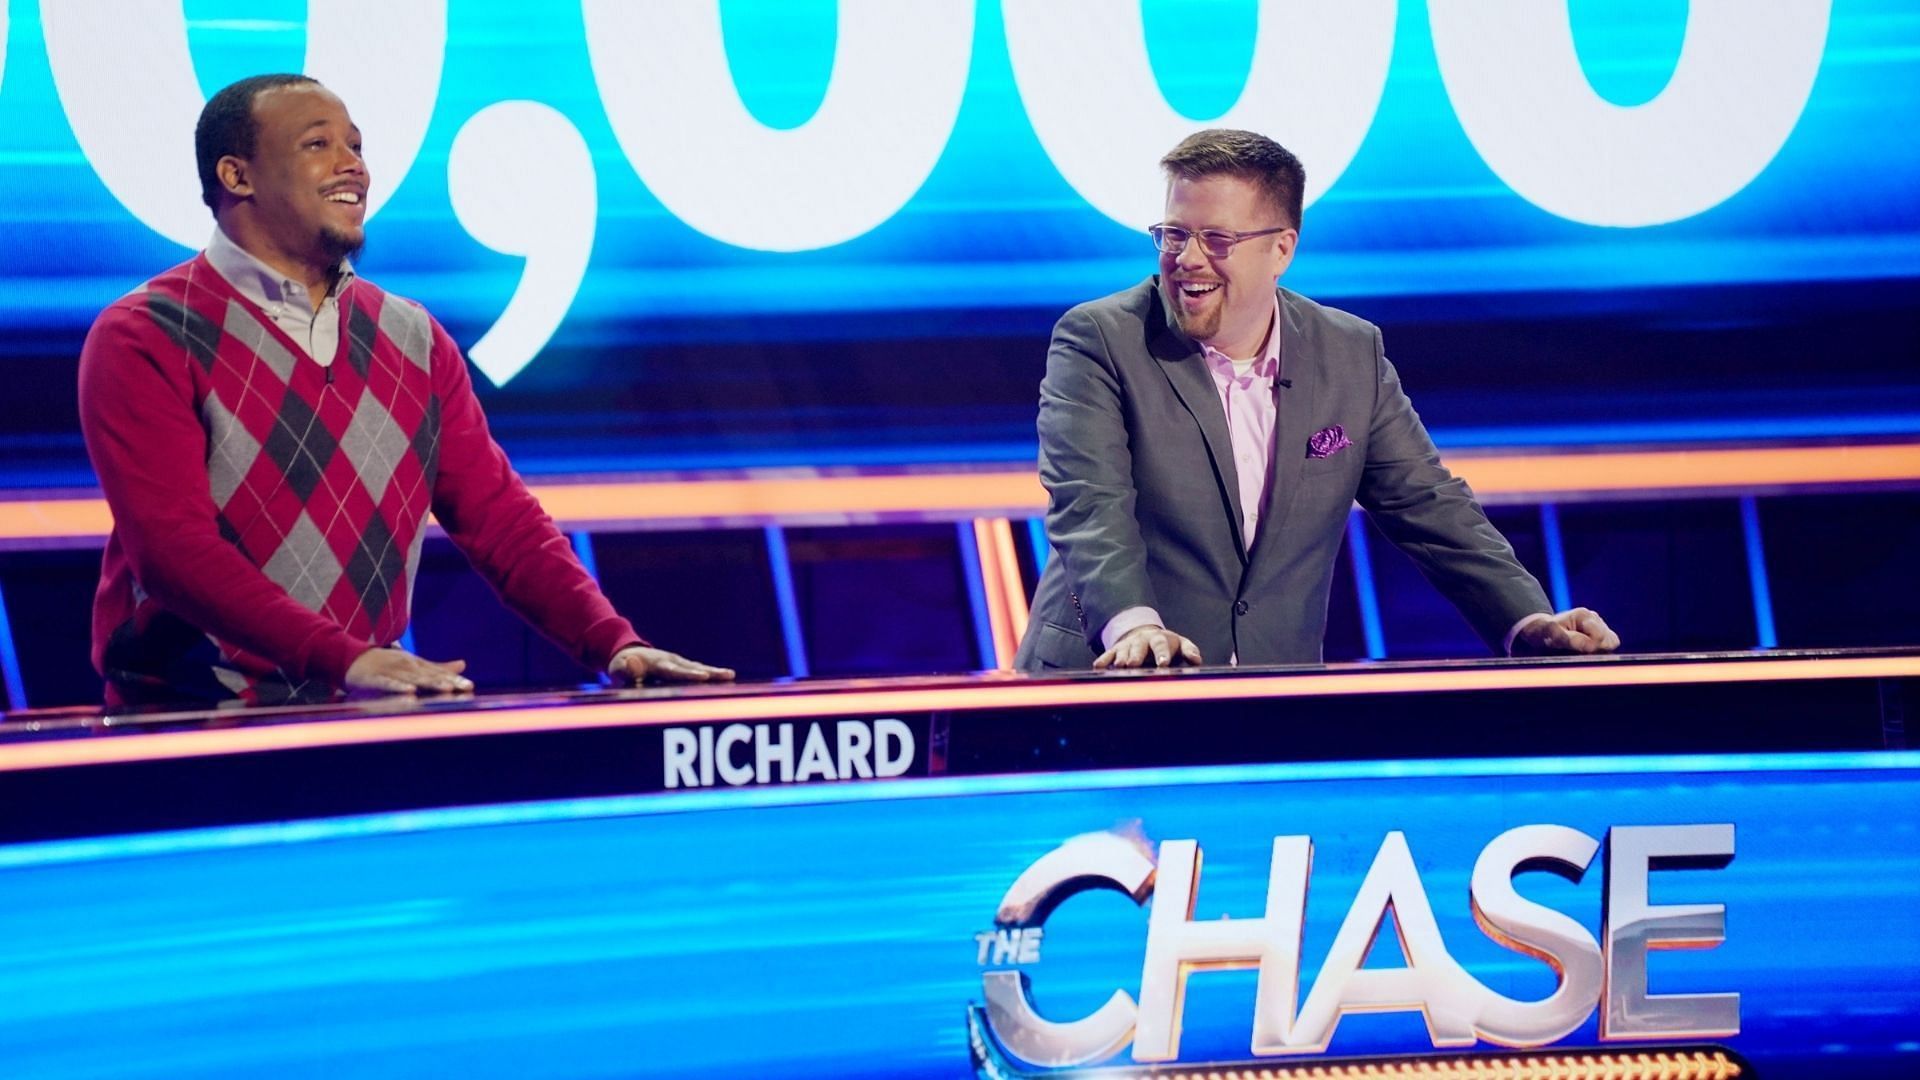 The Dream Team on this episode of The Chase won $300,000 (Image via Richard Cartwright/ABC)